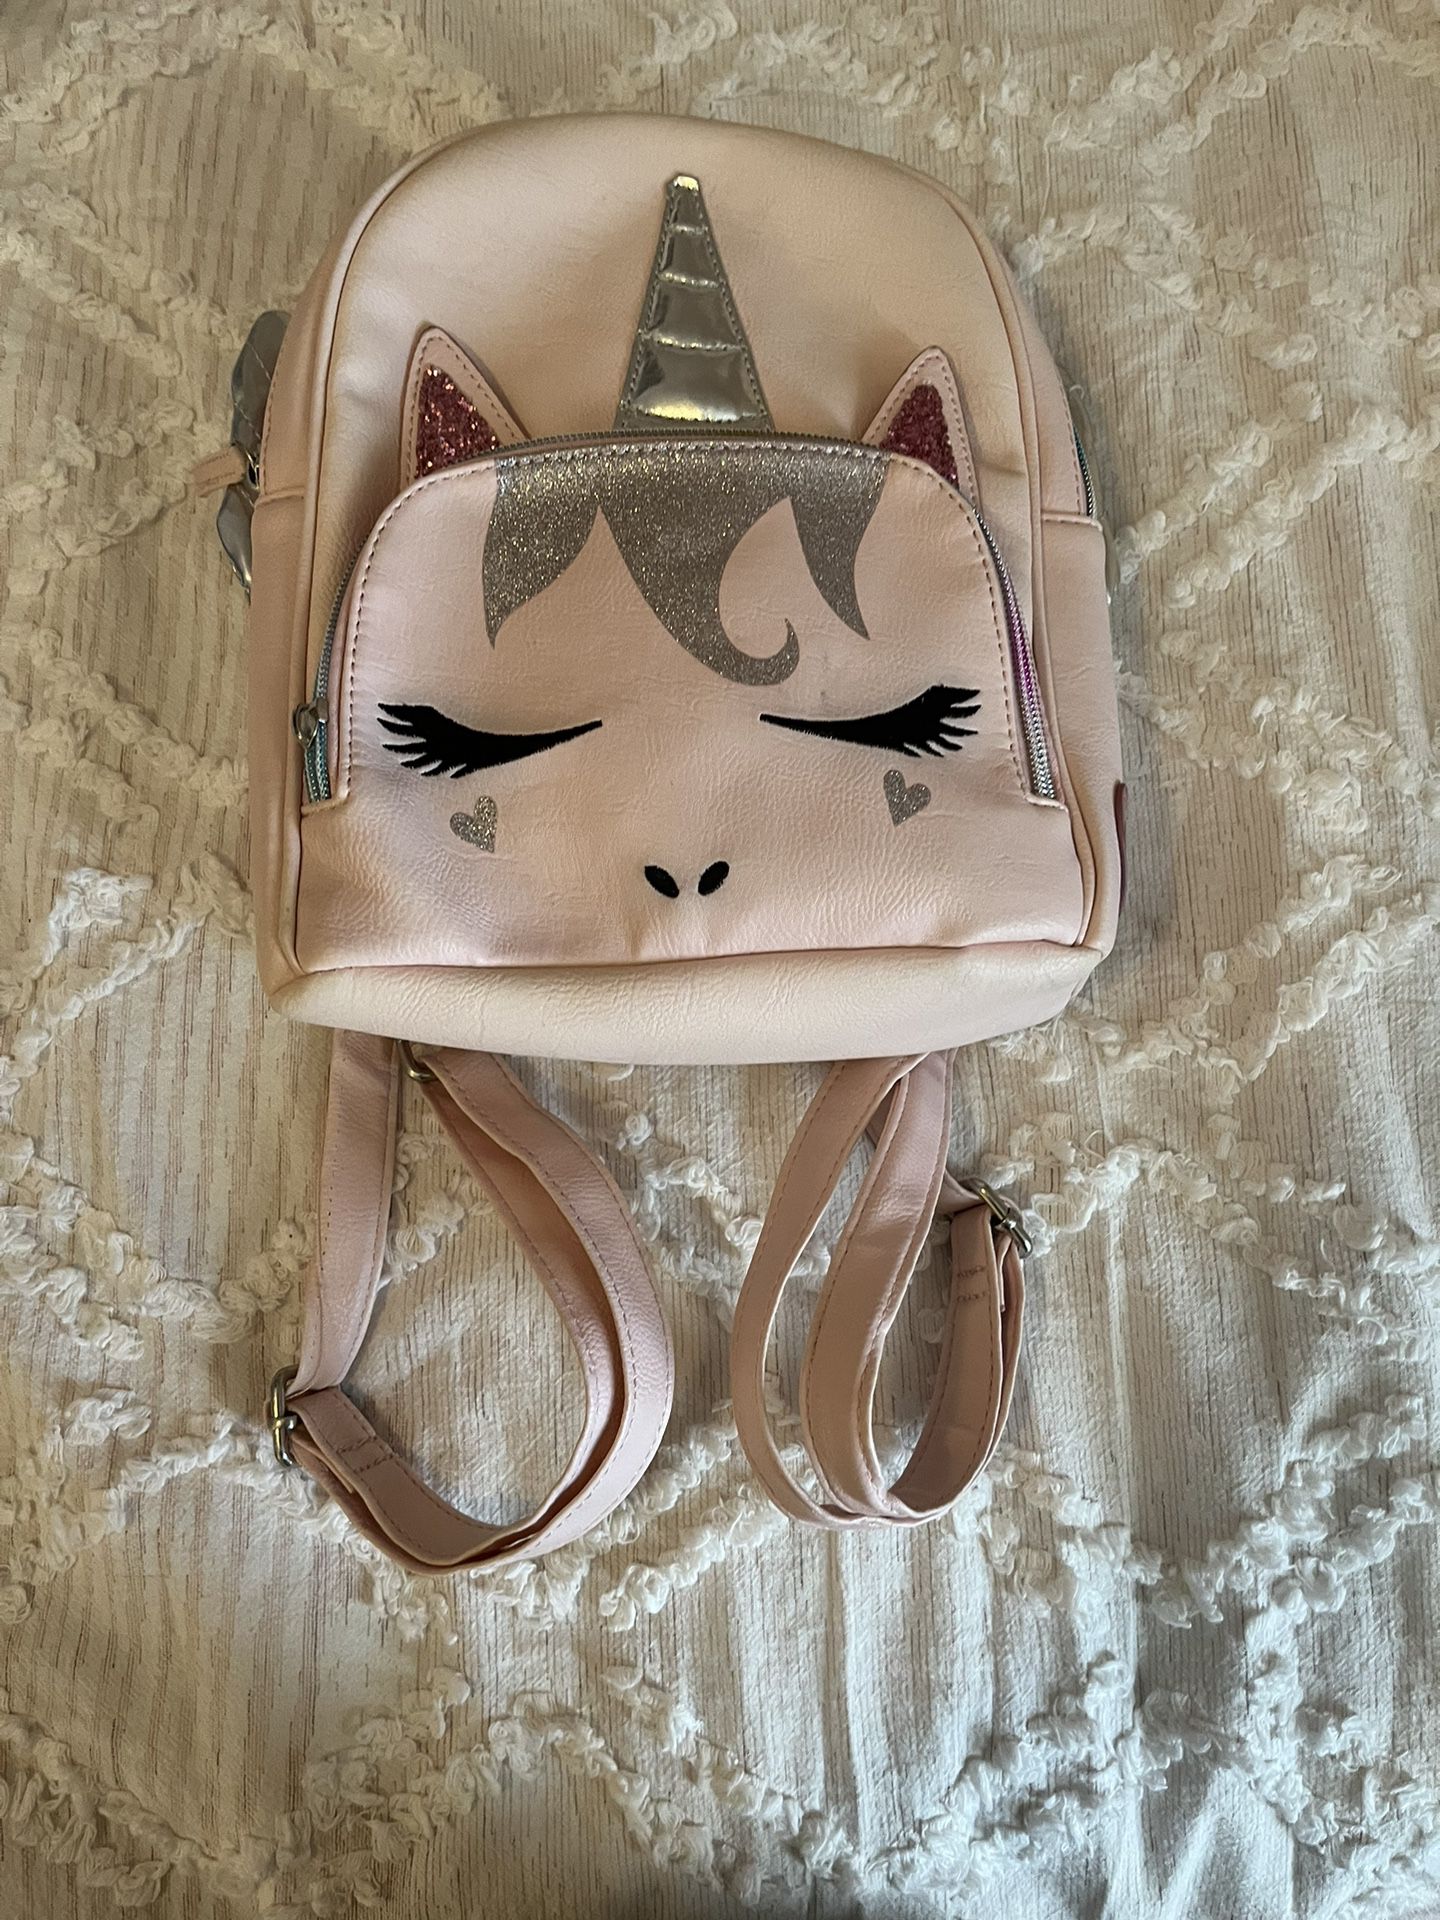 Girls Miniature Unicorn Backpack / Purse w/ Straps for Sale in Las ...